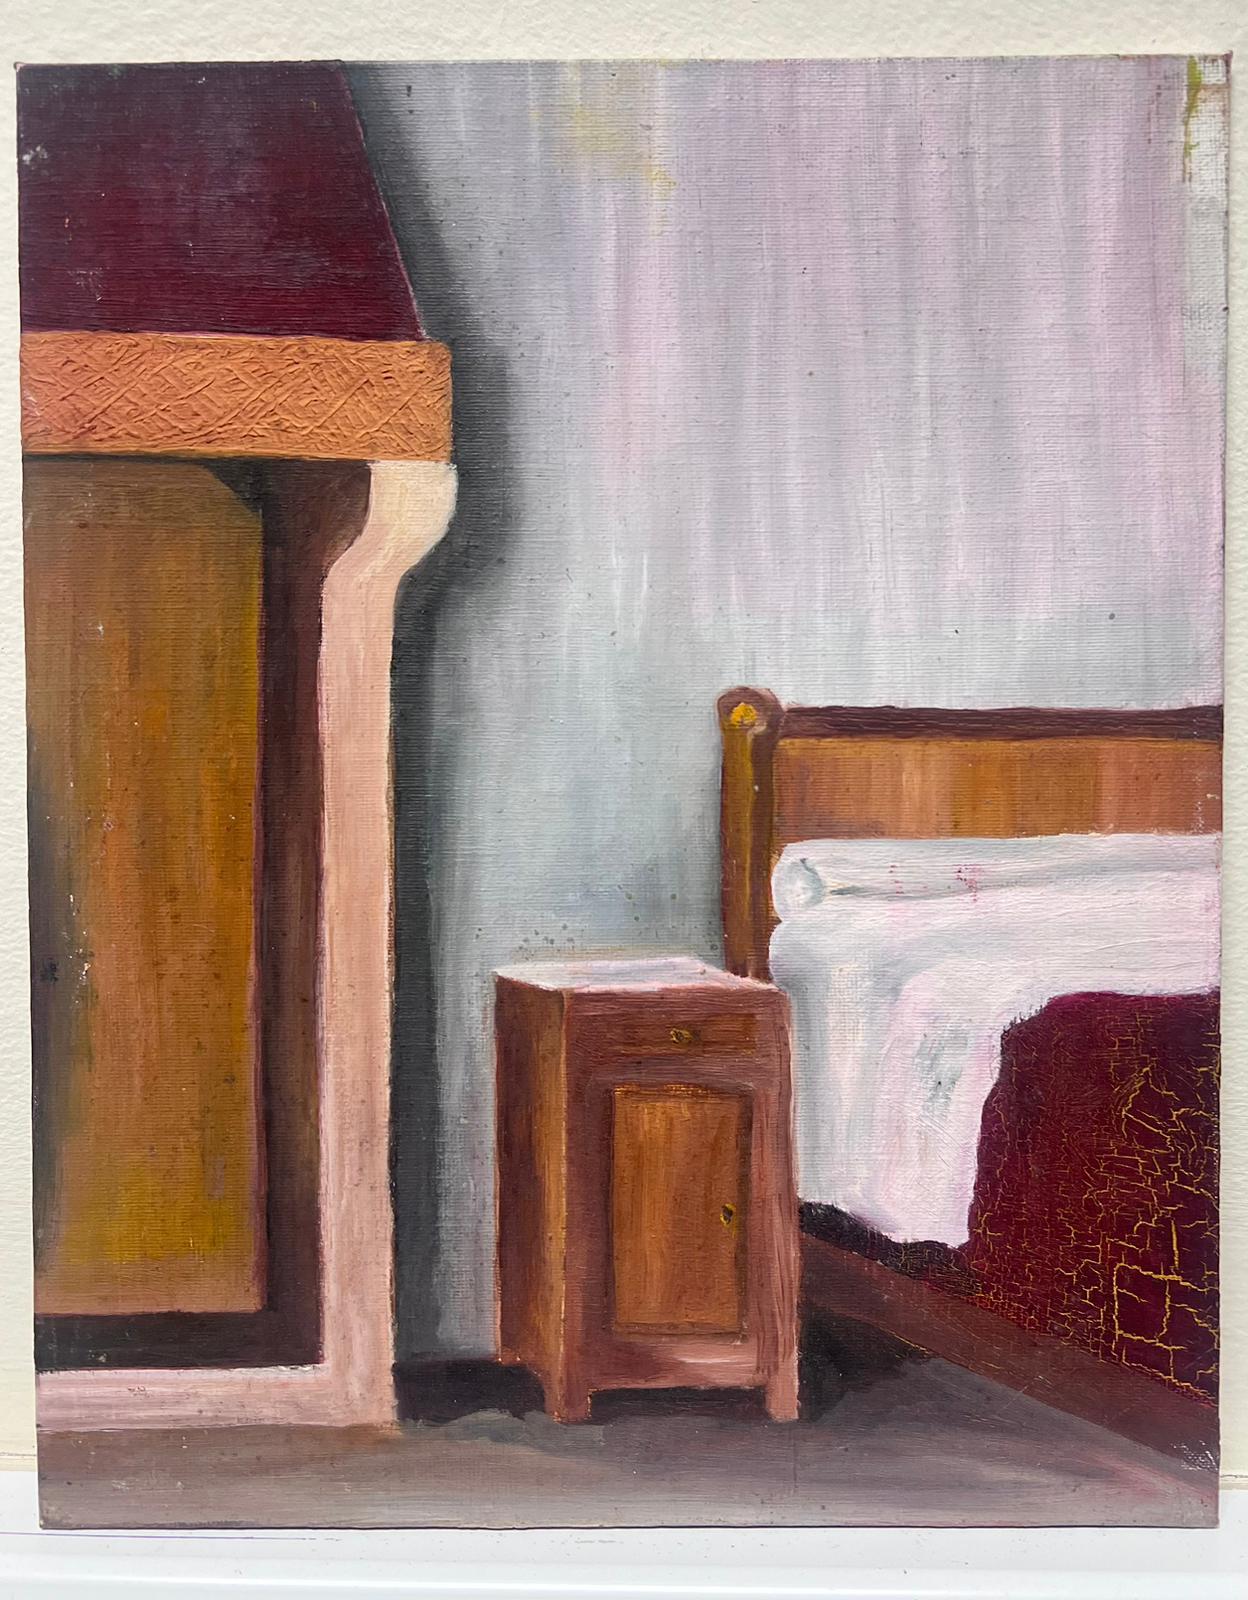 Interior Scene
by Jacques COULAIS (1955-2011)
oil painting on board
unframed: 10.75 x 8.75 inches
condition: excellent
provenance: all the paintings we have for sale by this artist have come from the artists studio and are all featured in the